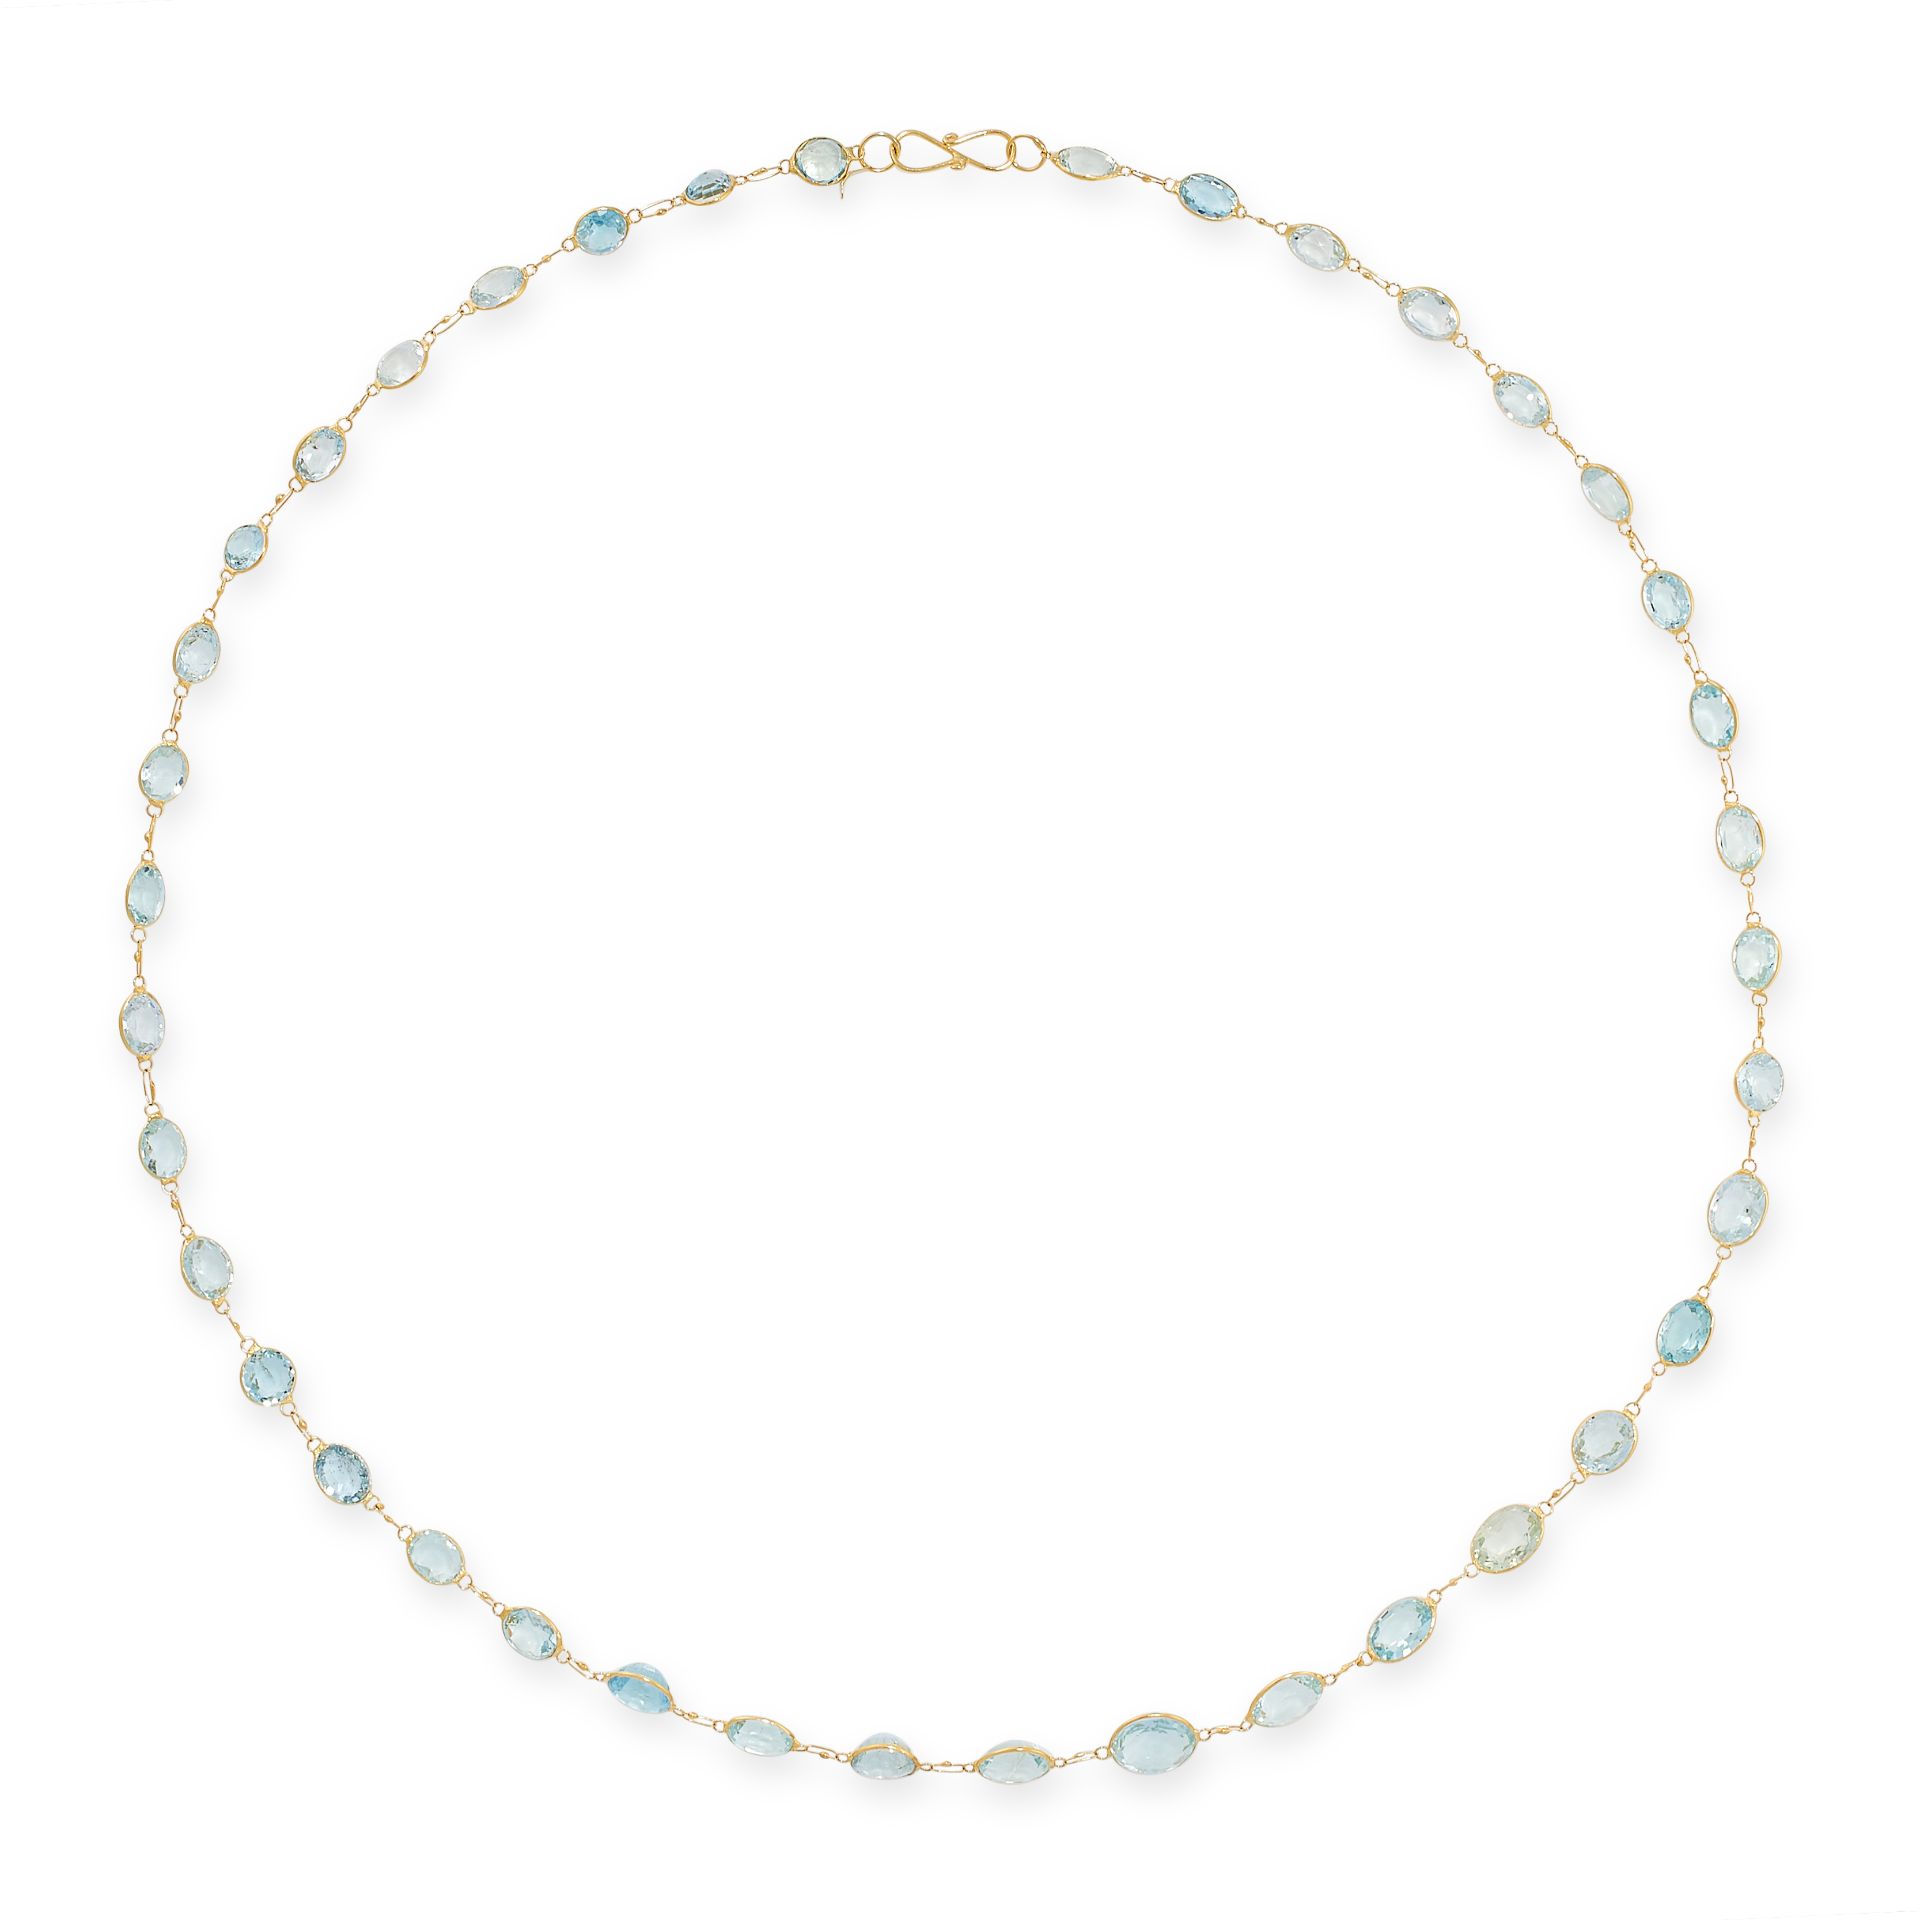 AN AQUAMARINE NECKLACE in 14ct yellow gold, comprising of a single row of oval cut aquamarines